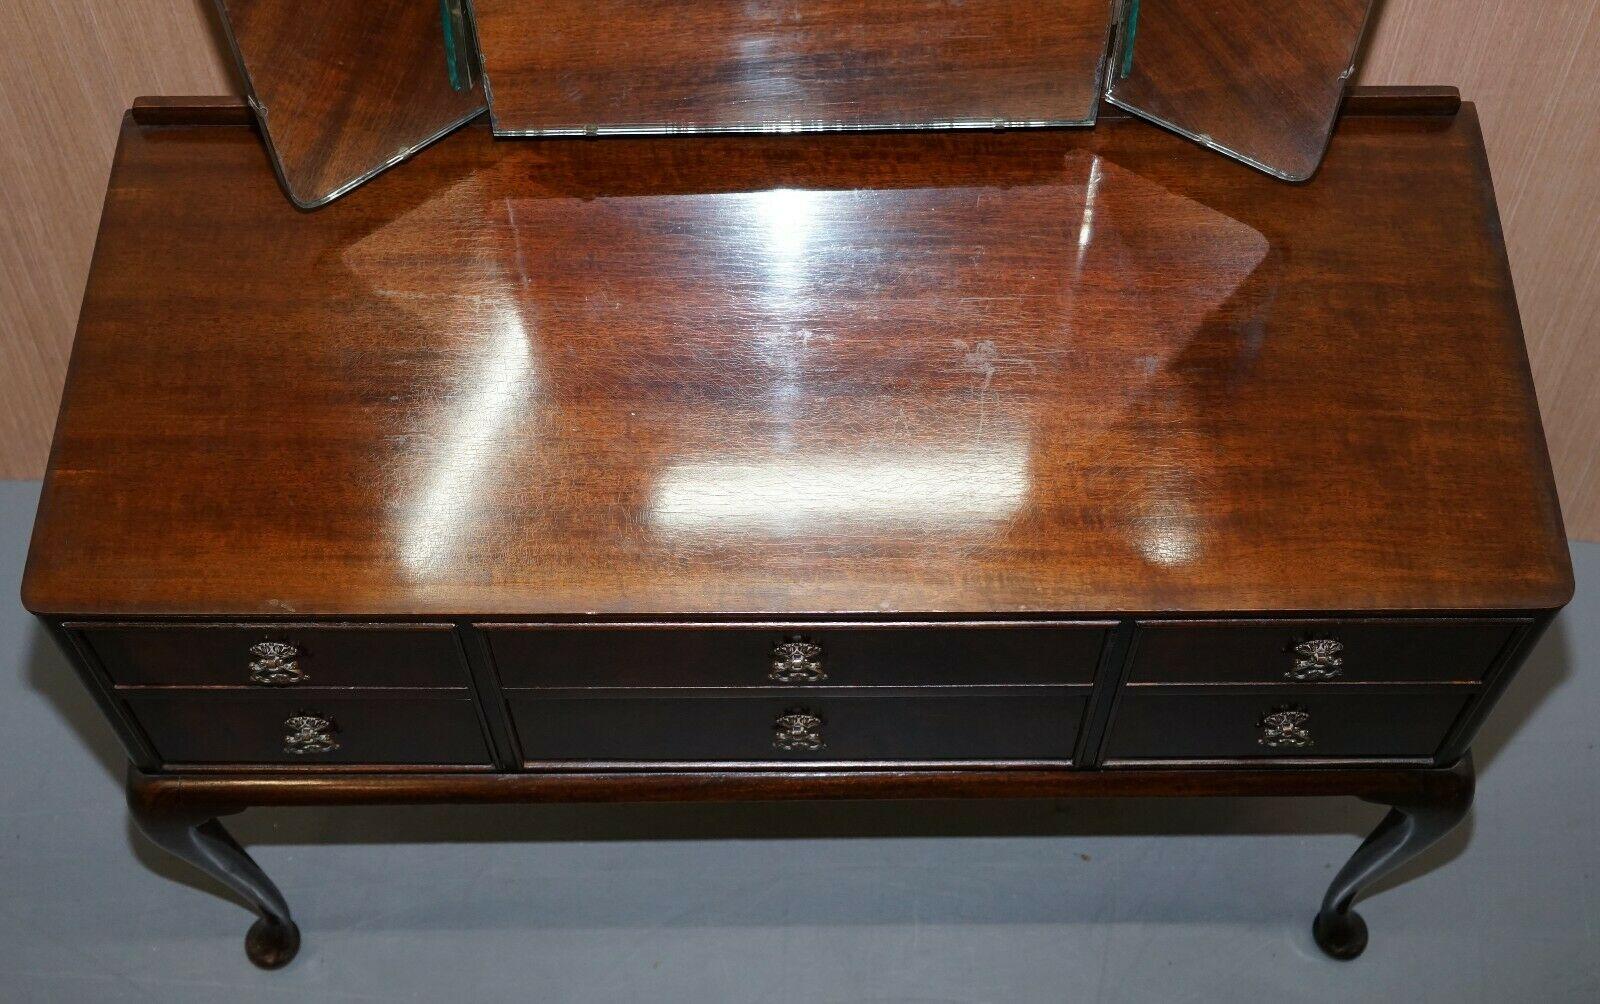 Scottish Nice Vintage Beithcraft Furniture Mahogany Dressing Table Part of Lovely Suite